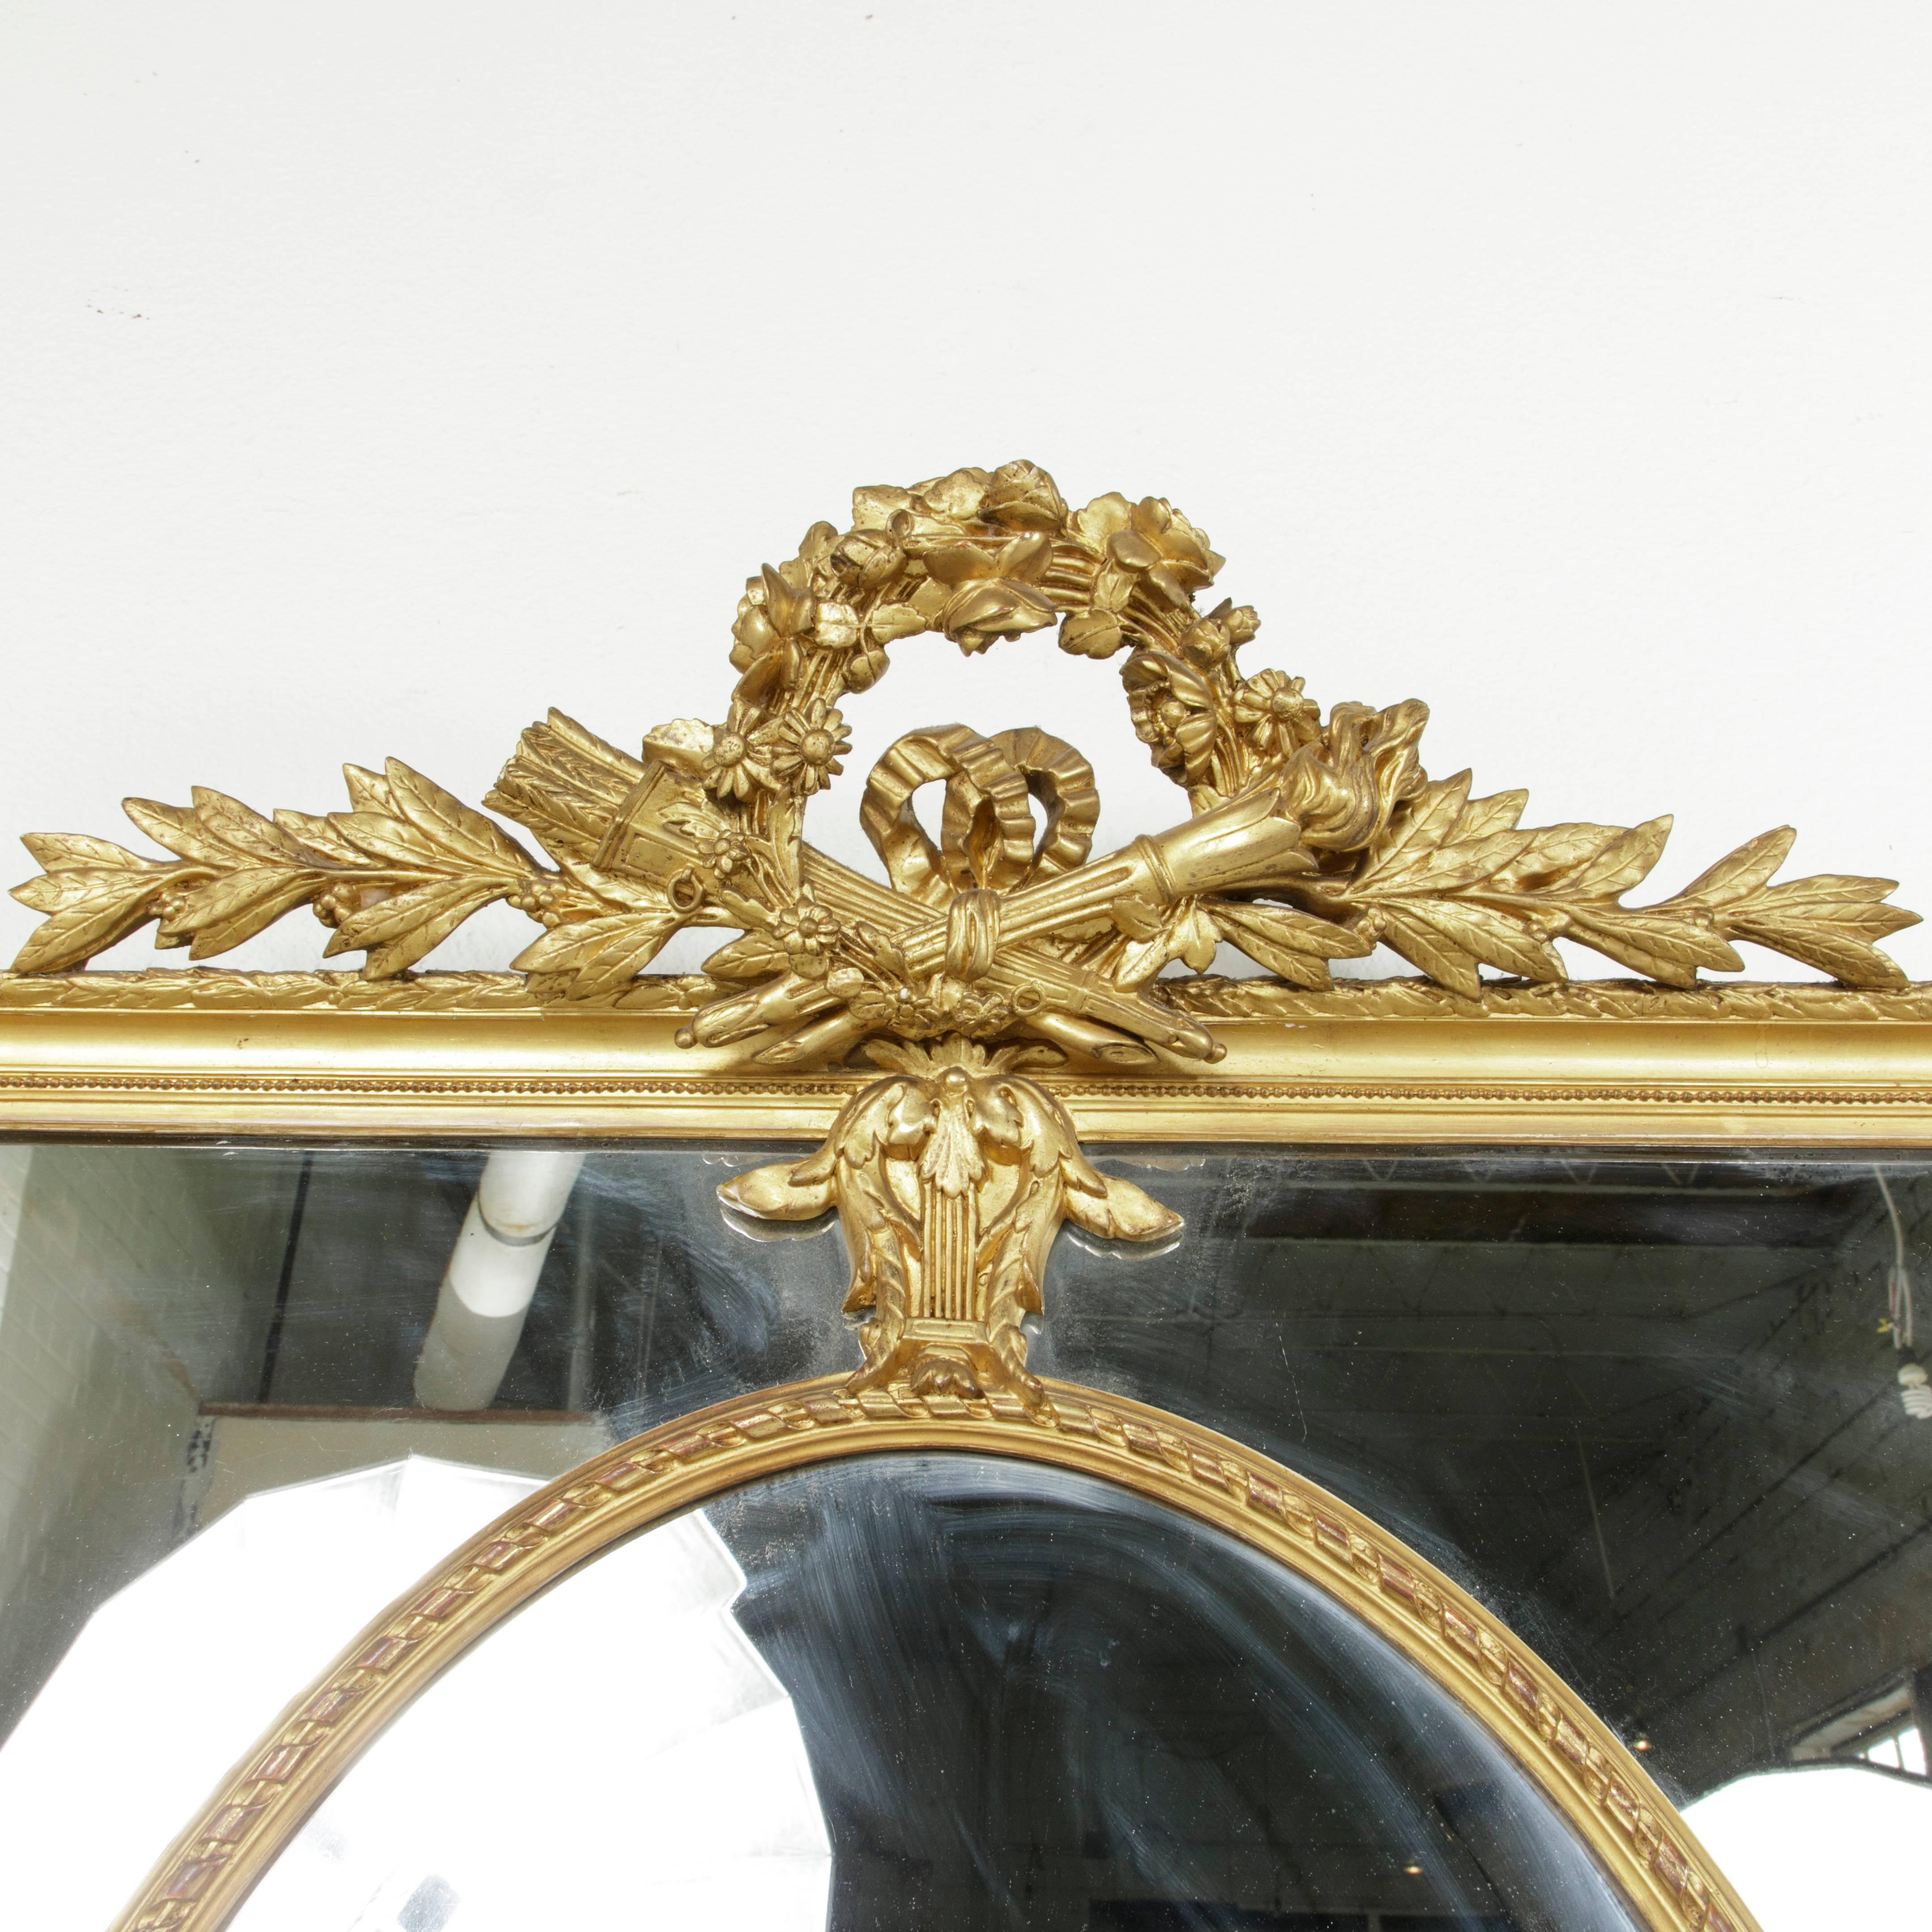 This large late 19th century French giltwood mirror features a classic Louis XVI motif of crossed torch and quiver of arrows with a central floral crown at the top. Hand-carved lyres connect the outer frame to the inset giltwood oval that surrounds